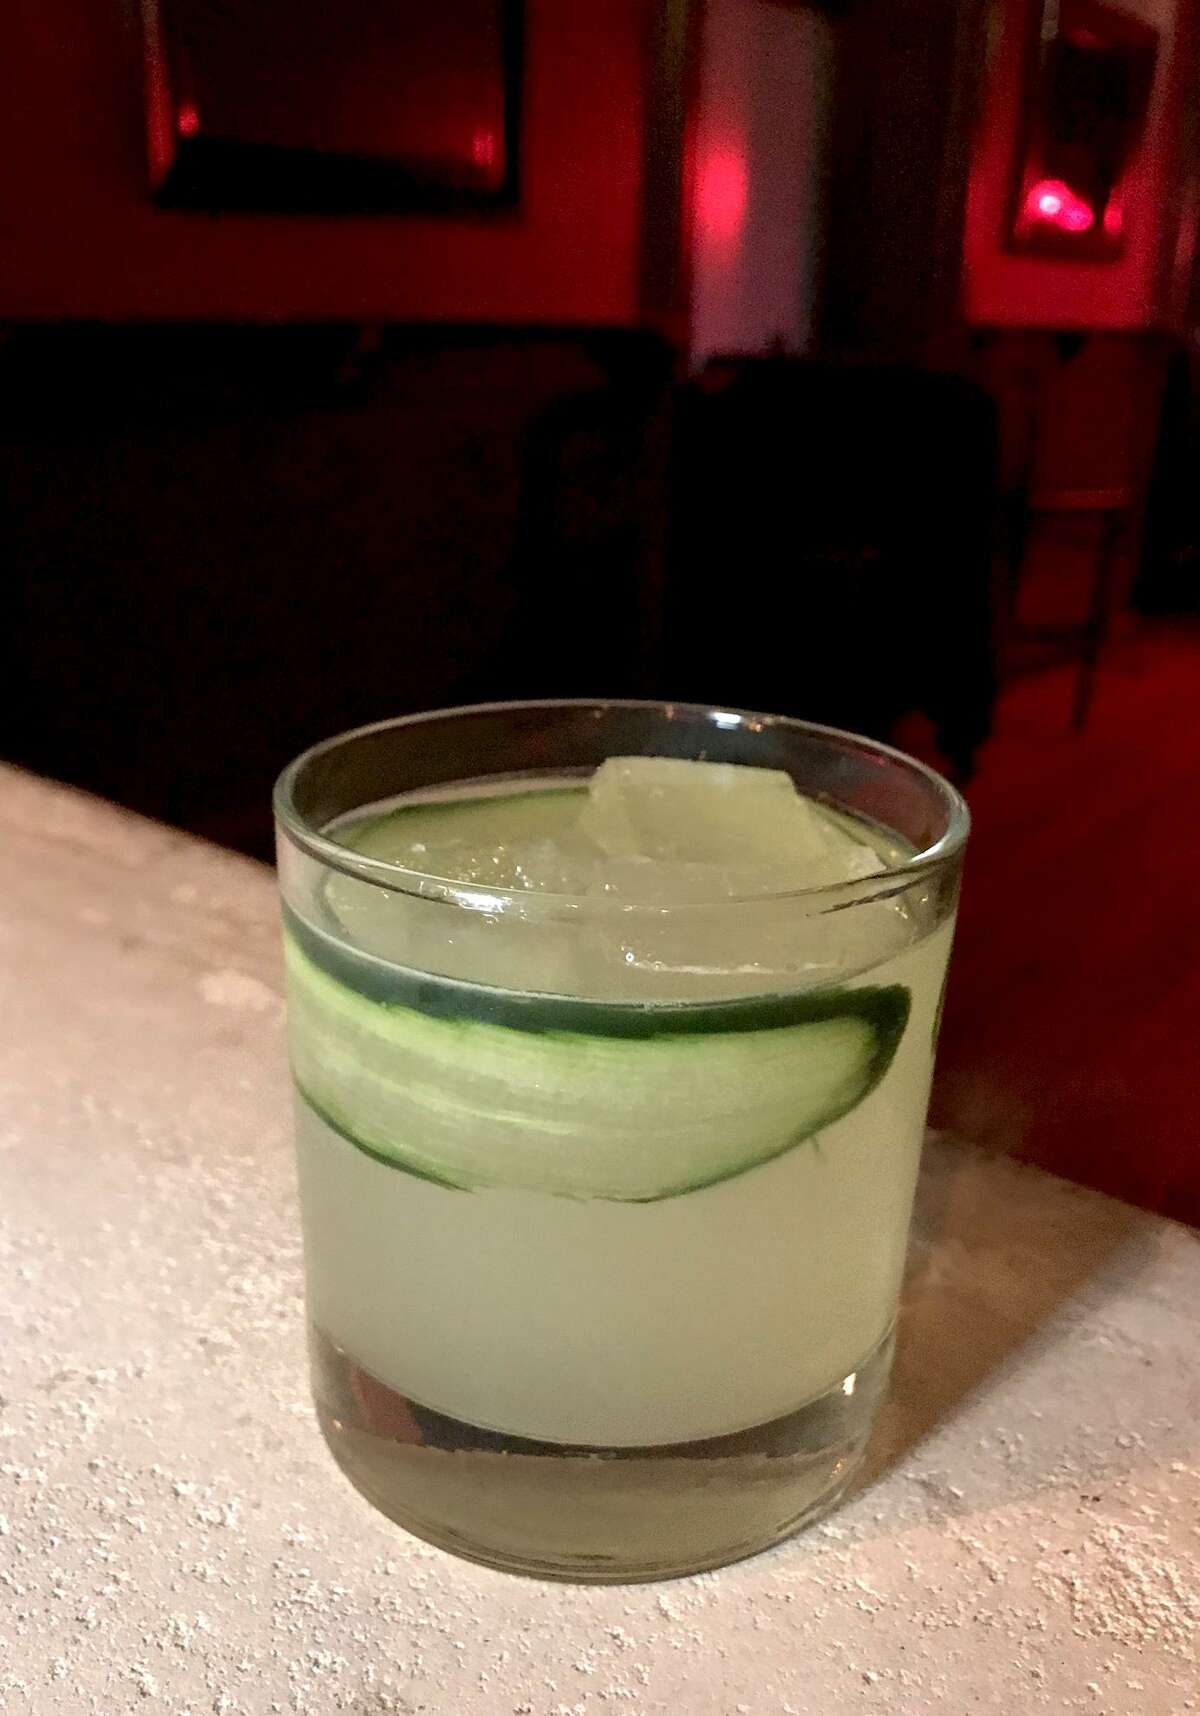 The I.D.T. cocktail at SoHo Wine & Martini Bar has a mix of floral and citrus with gin and ginger beer.